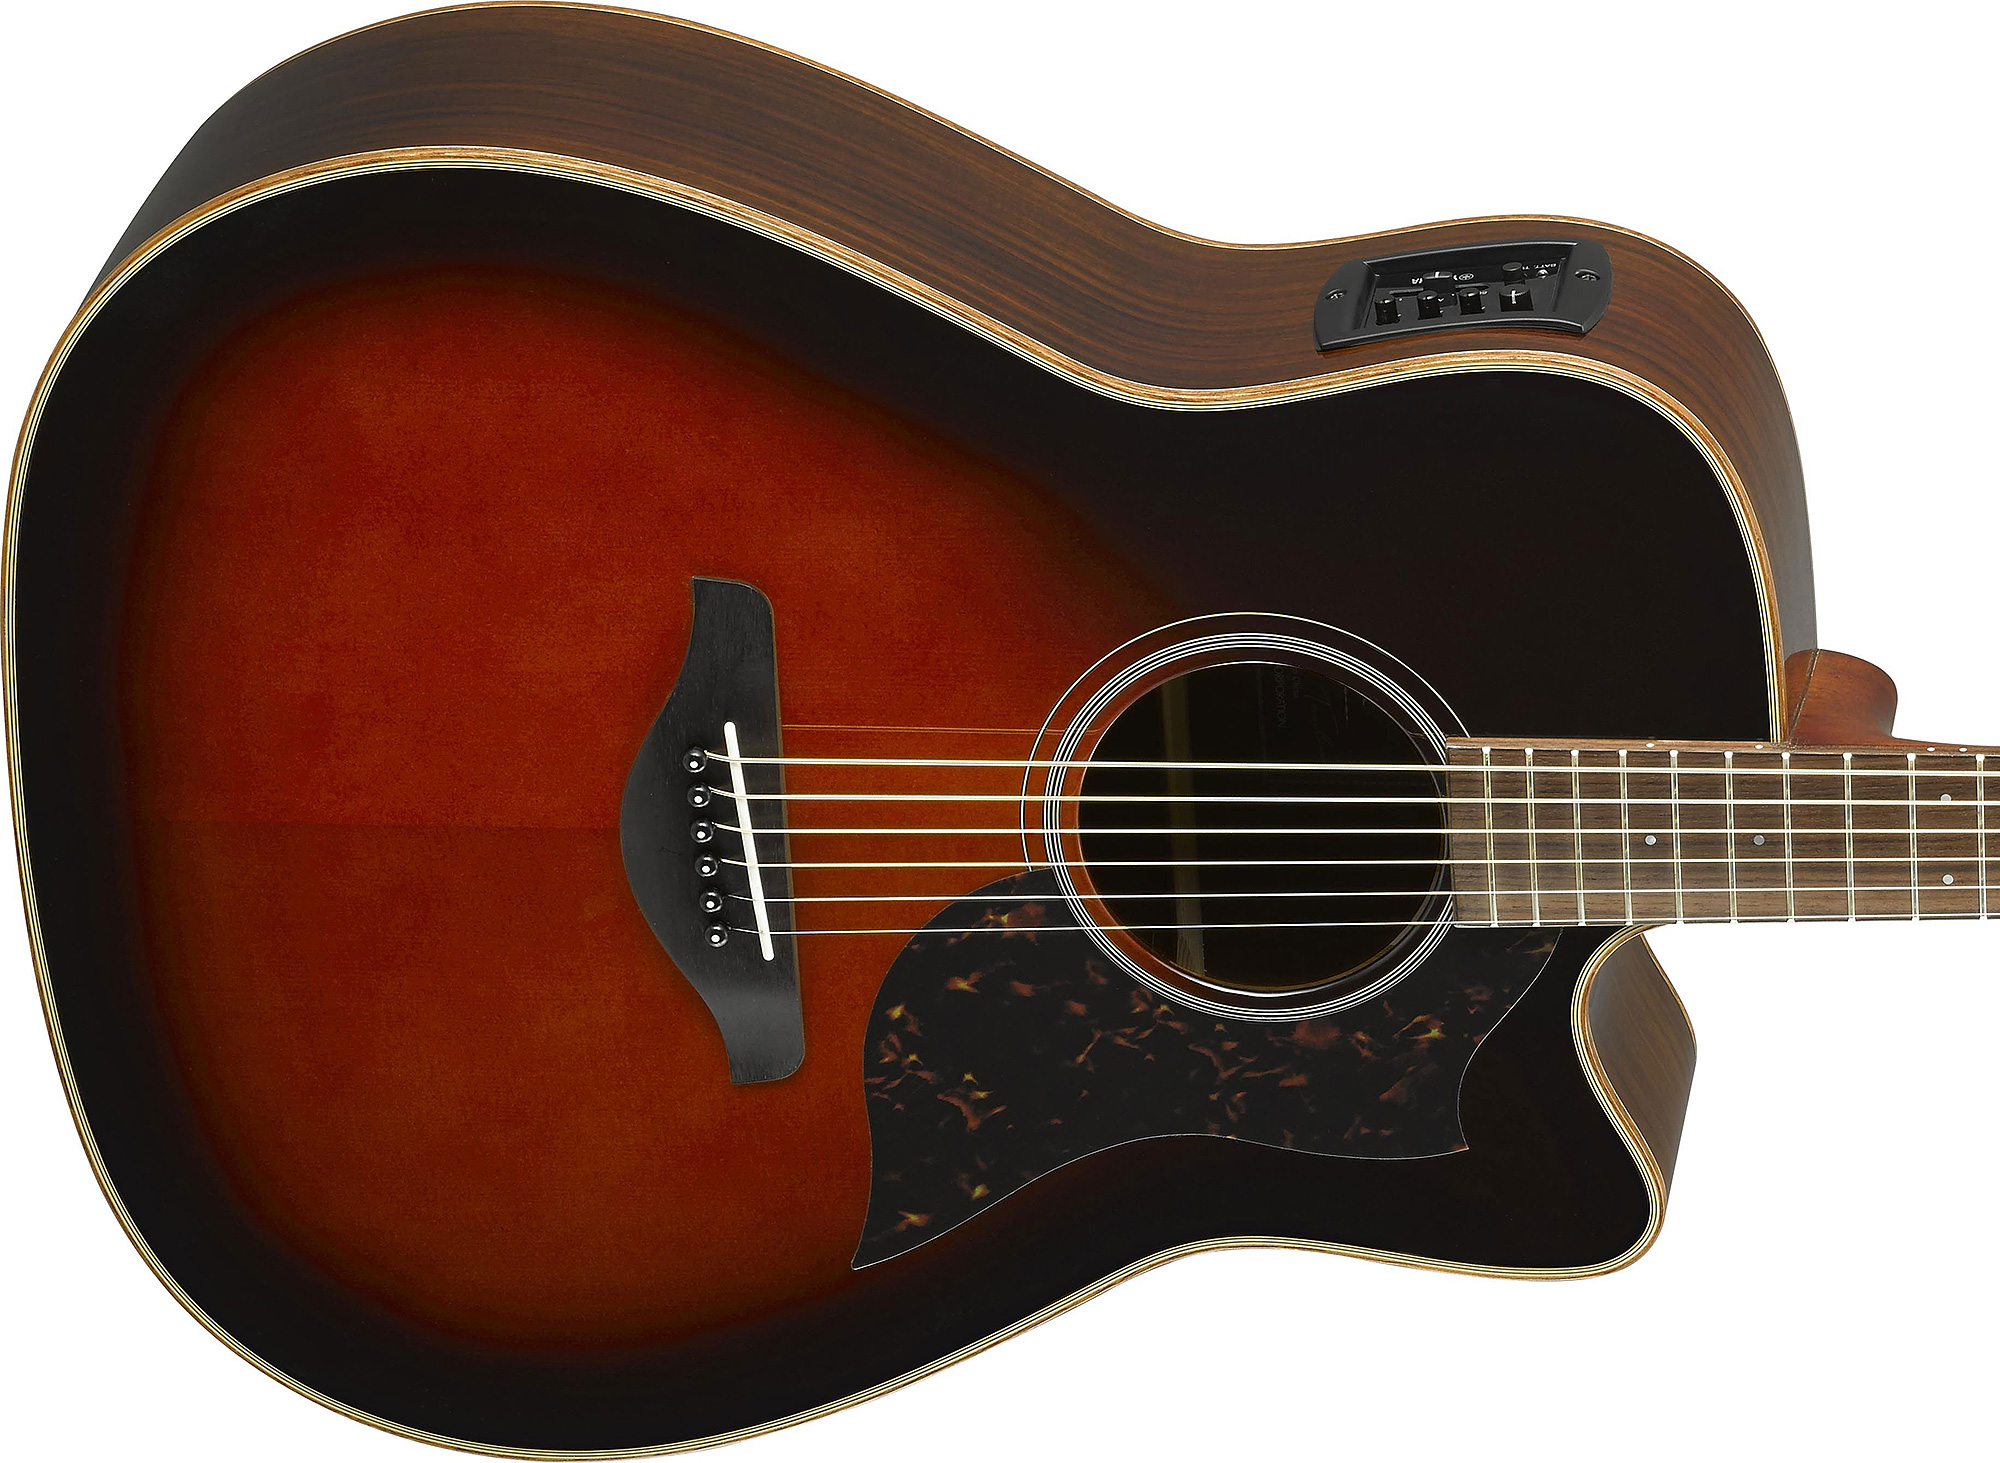 Yamaha A1r Ii Tbs Dreadnought Cw Epicea Palissandre 2017 - Tobacco Brown Sunburst - Electro acoustic guitar - Variation 3